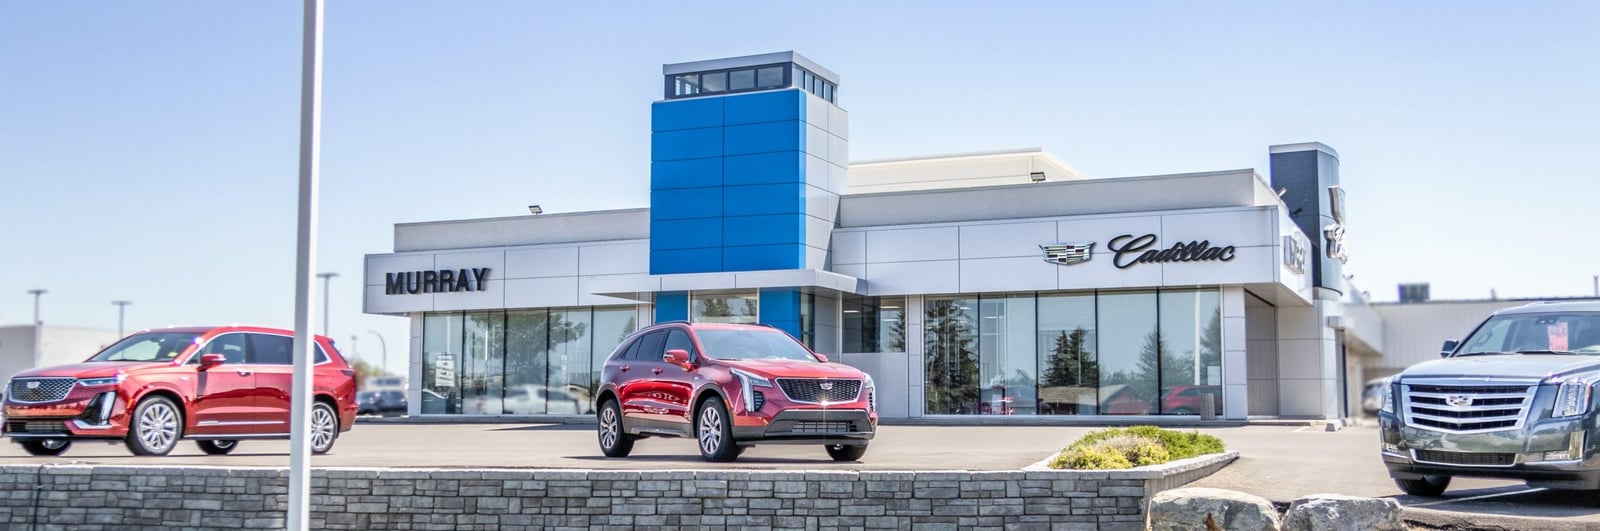 Welcome to <span class="nowrap">Murray Cadillac Lethbridge!</span>